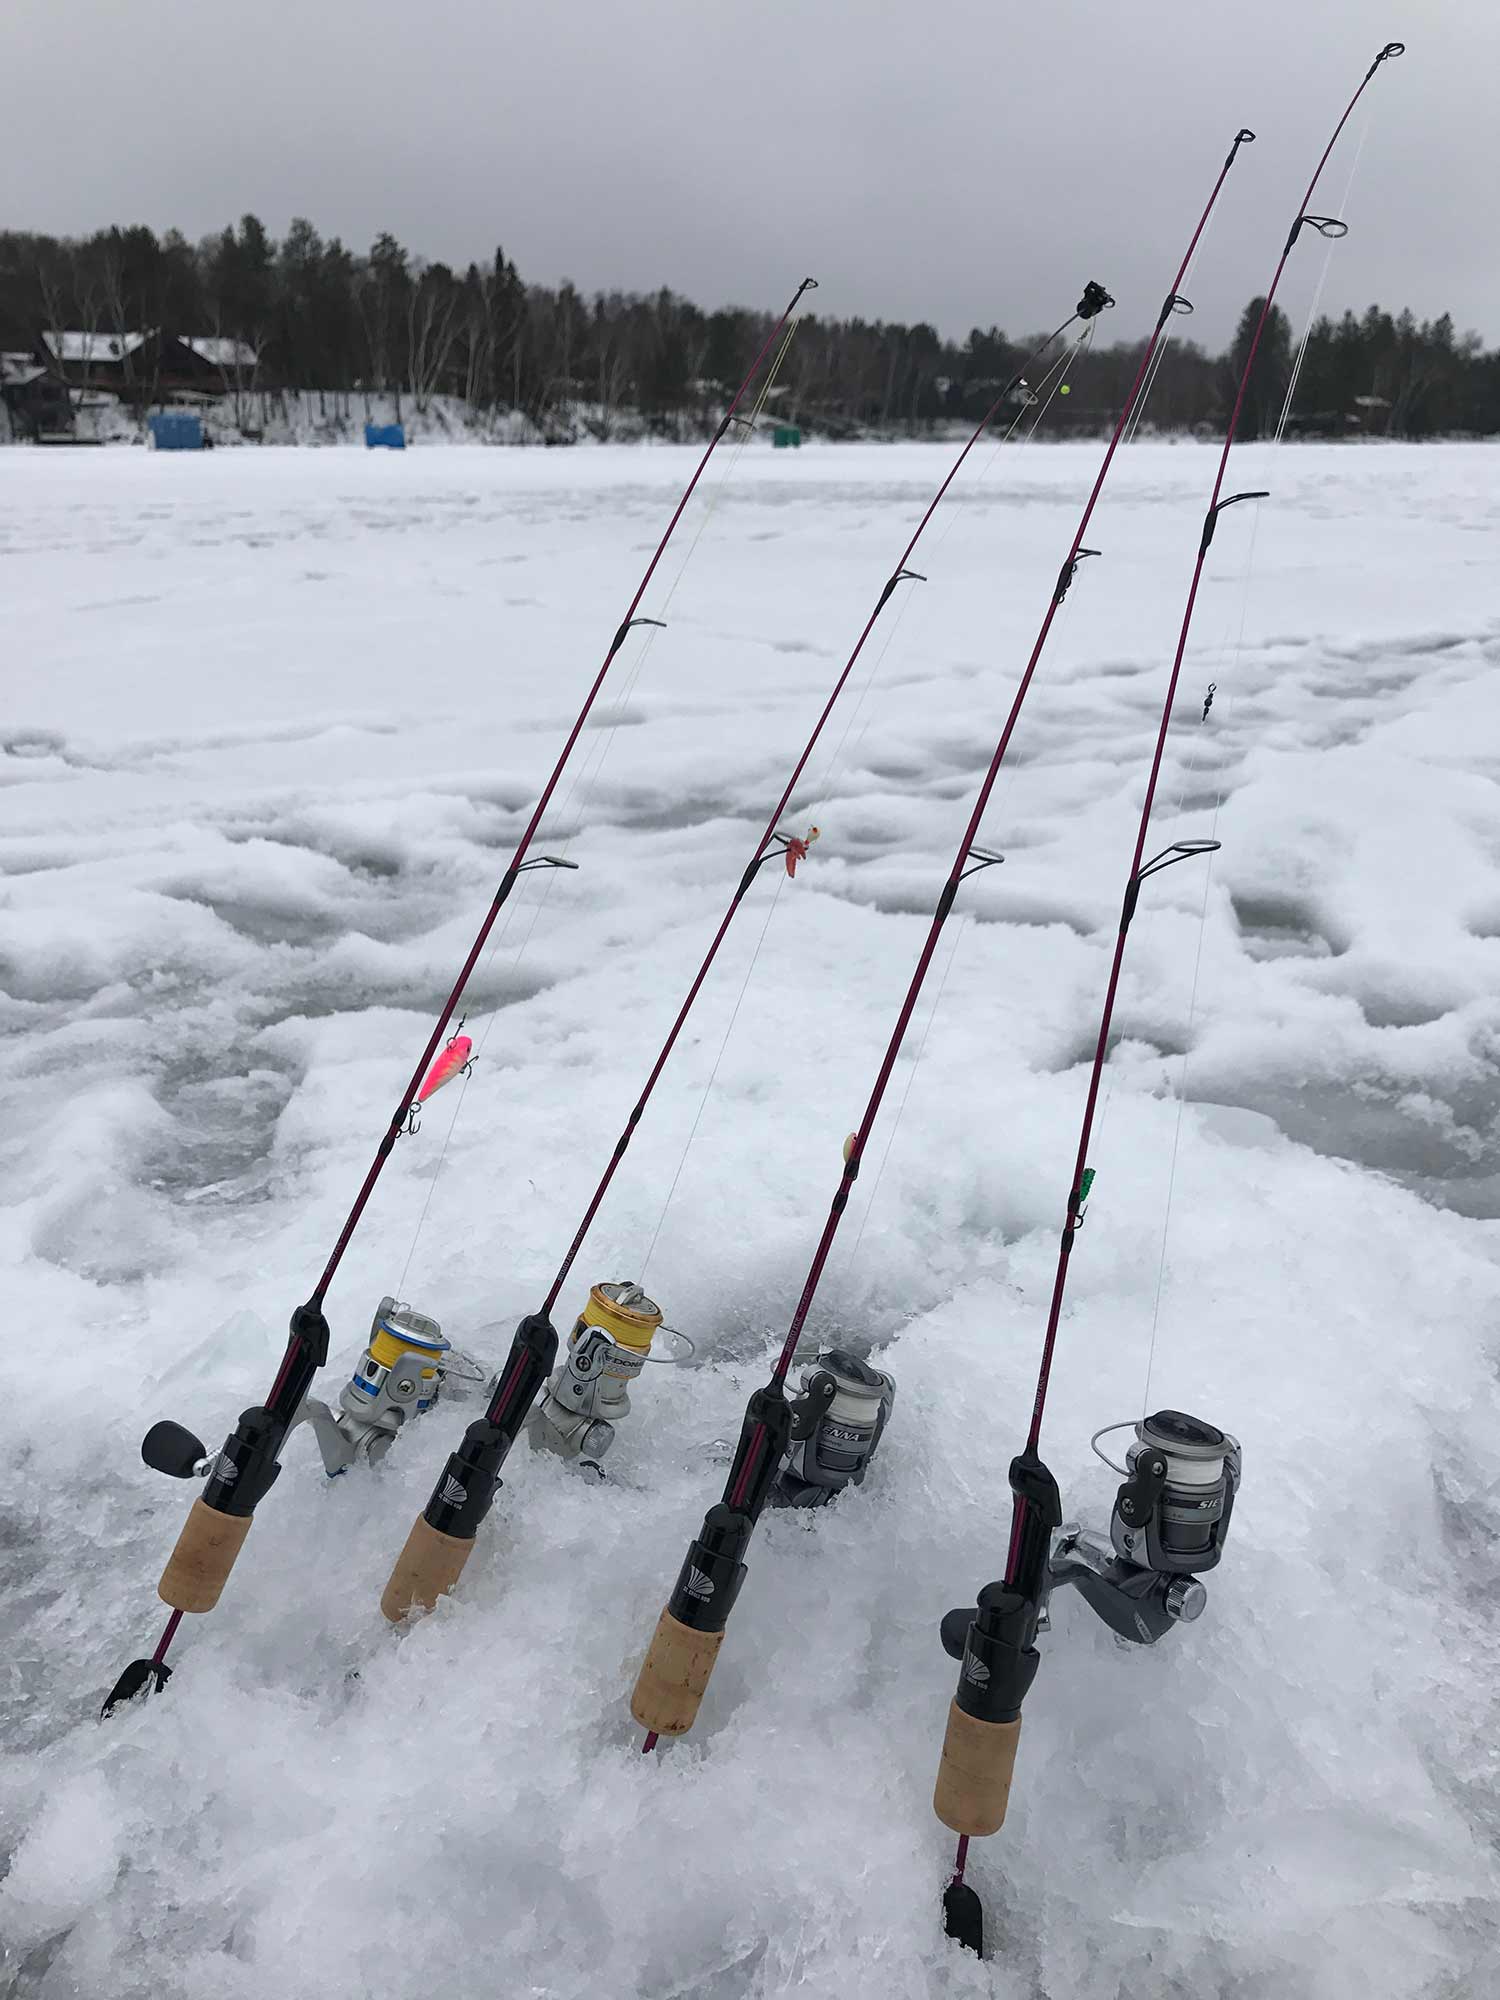 How to rig an ice fishing rod - Quora